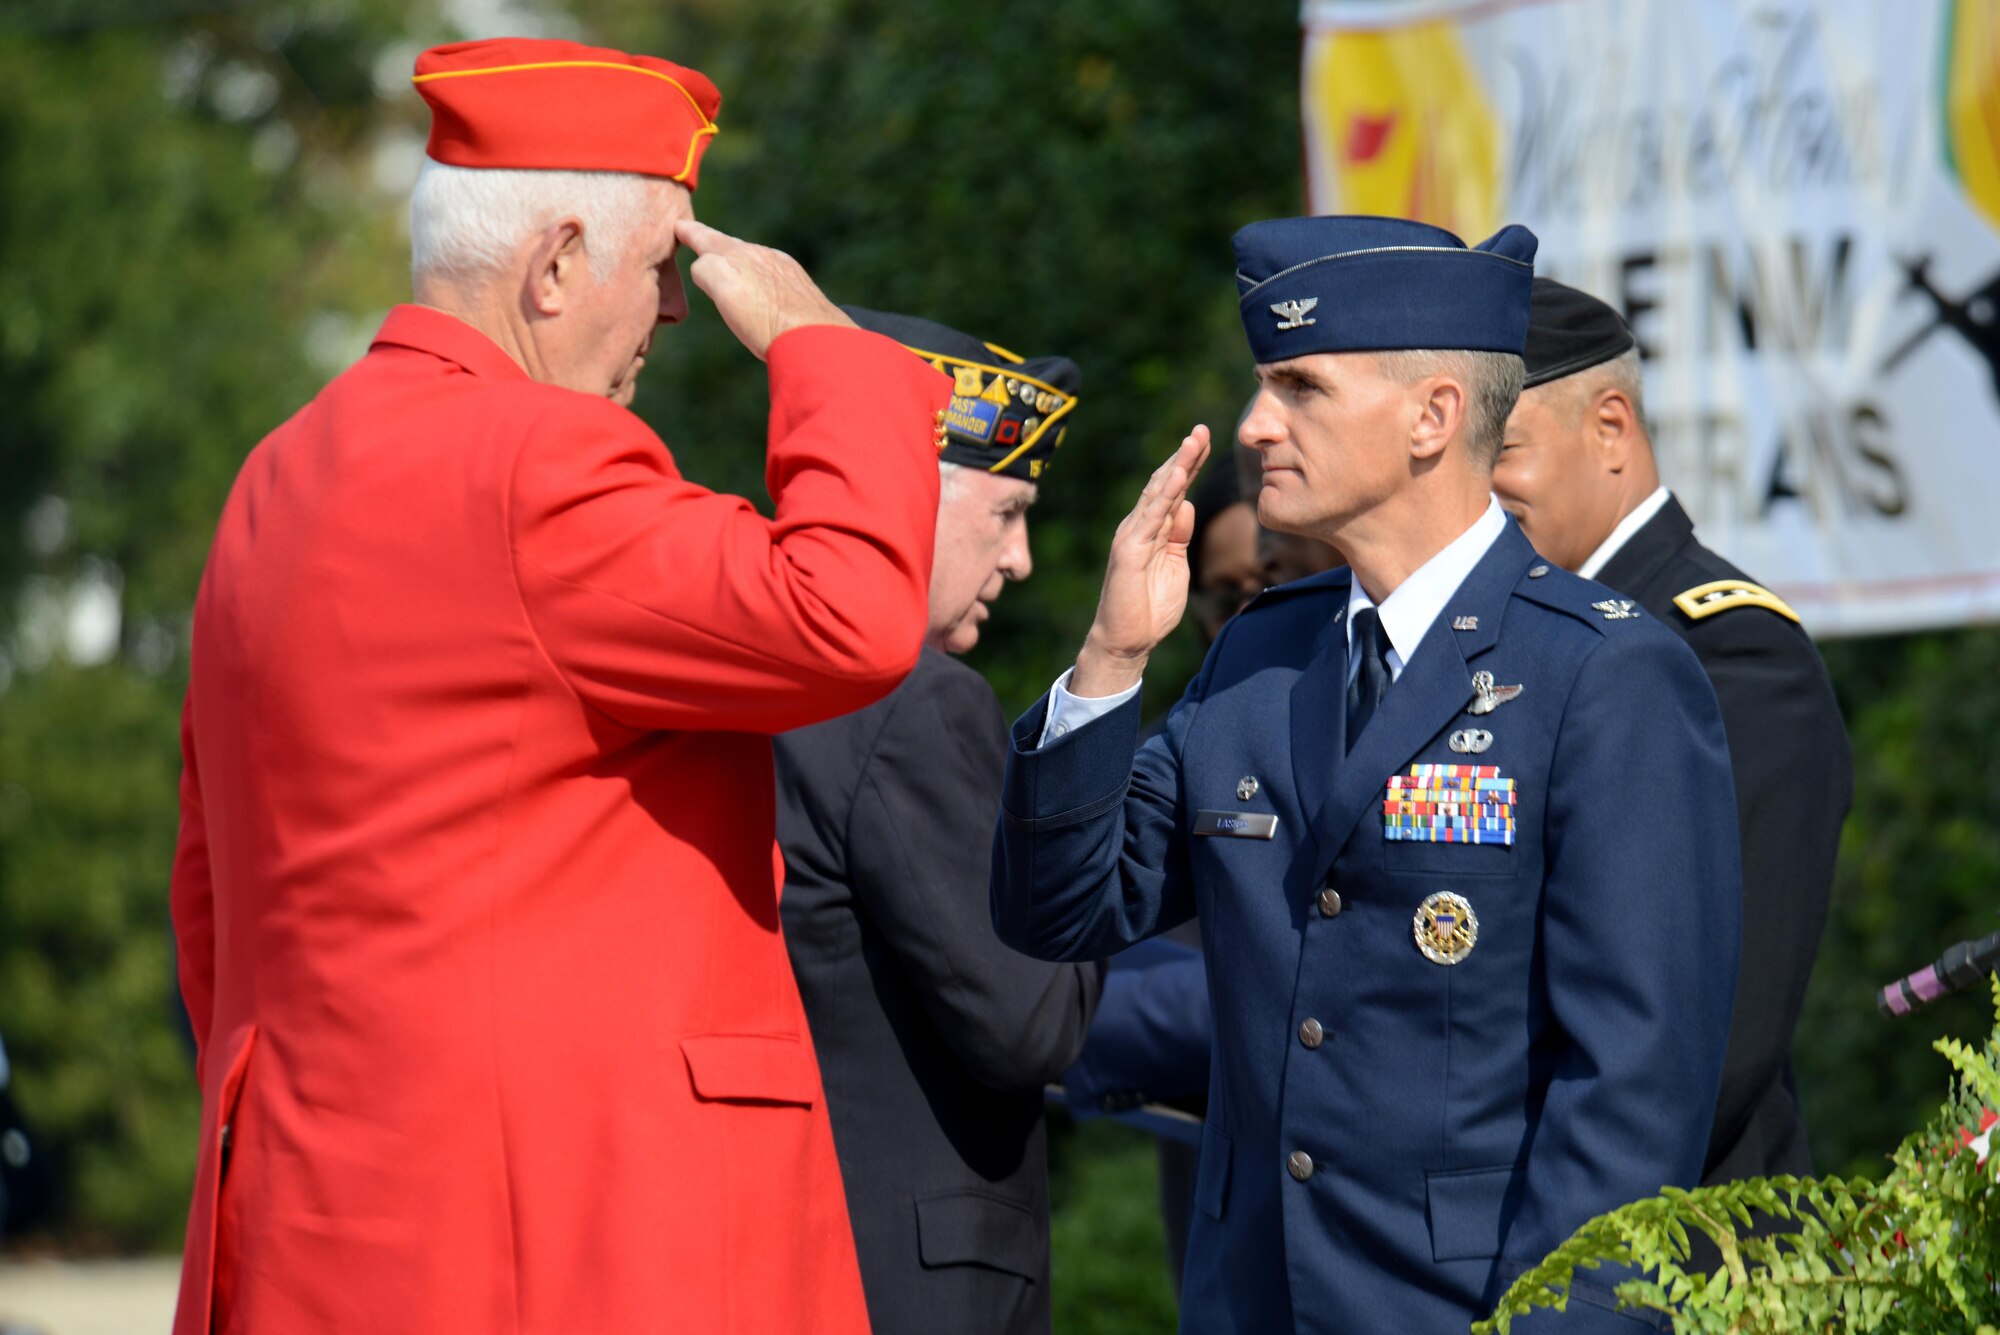 U.S. Air Force Col. Daniel Lasica, 20th Fighter Wing commander, salutes a veteran from the local community during a Veterans Day ceremony, Sumter, S.C., Nov. 11, 2016. During the ceremony, local veterans were recognized and honored for their service to the United States. (U.S. Air Force photo by Airman 1st Class Kelsey Tucker)